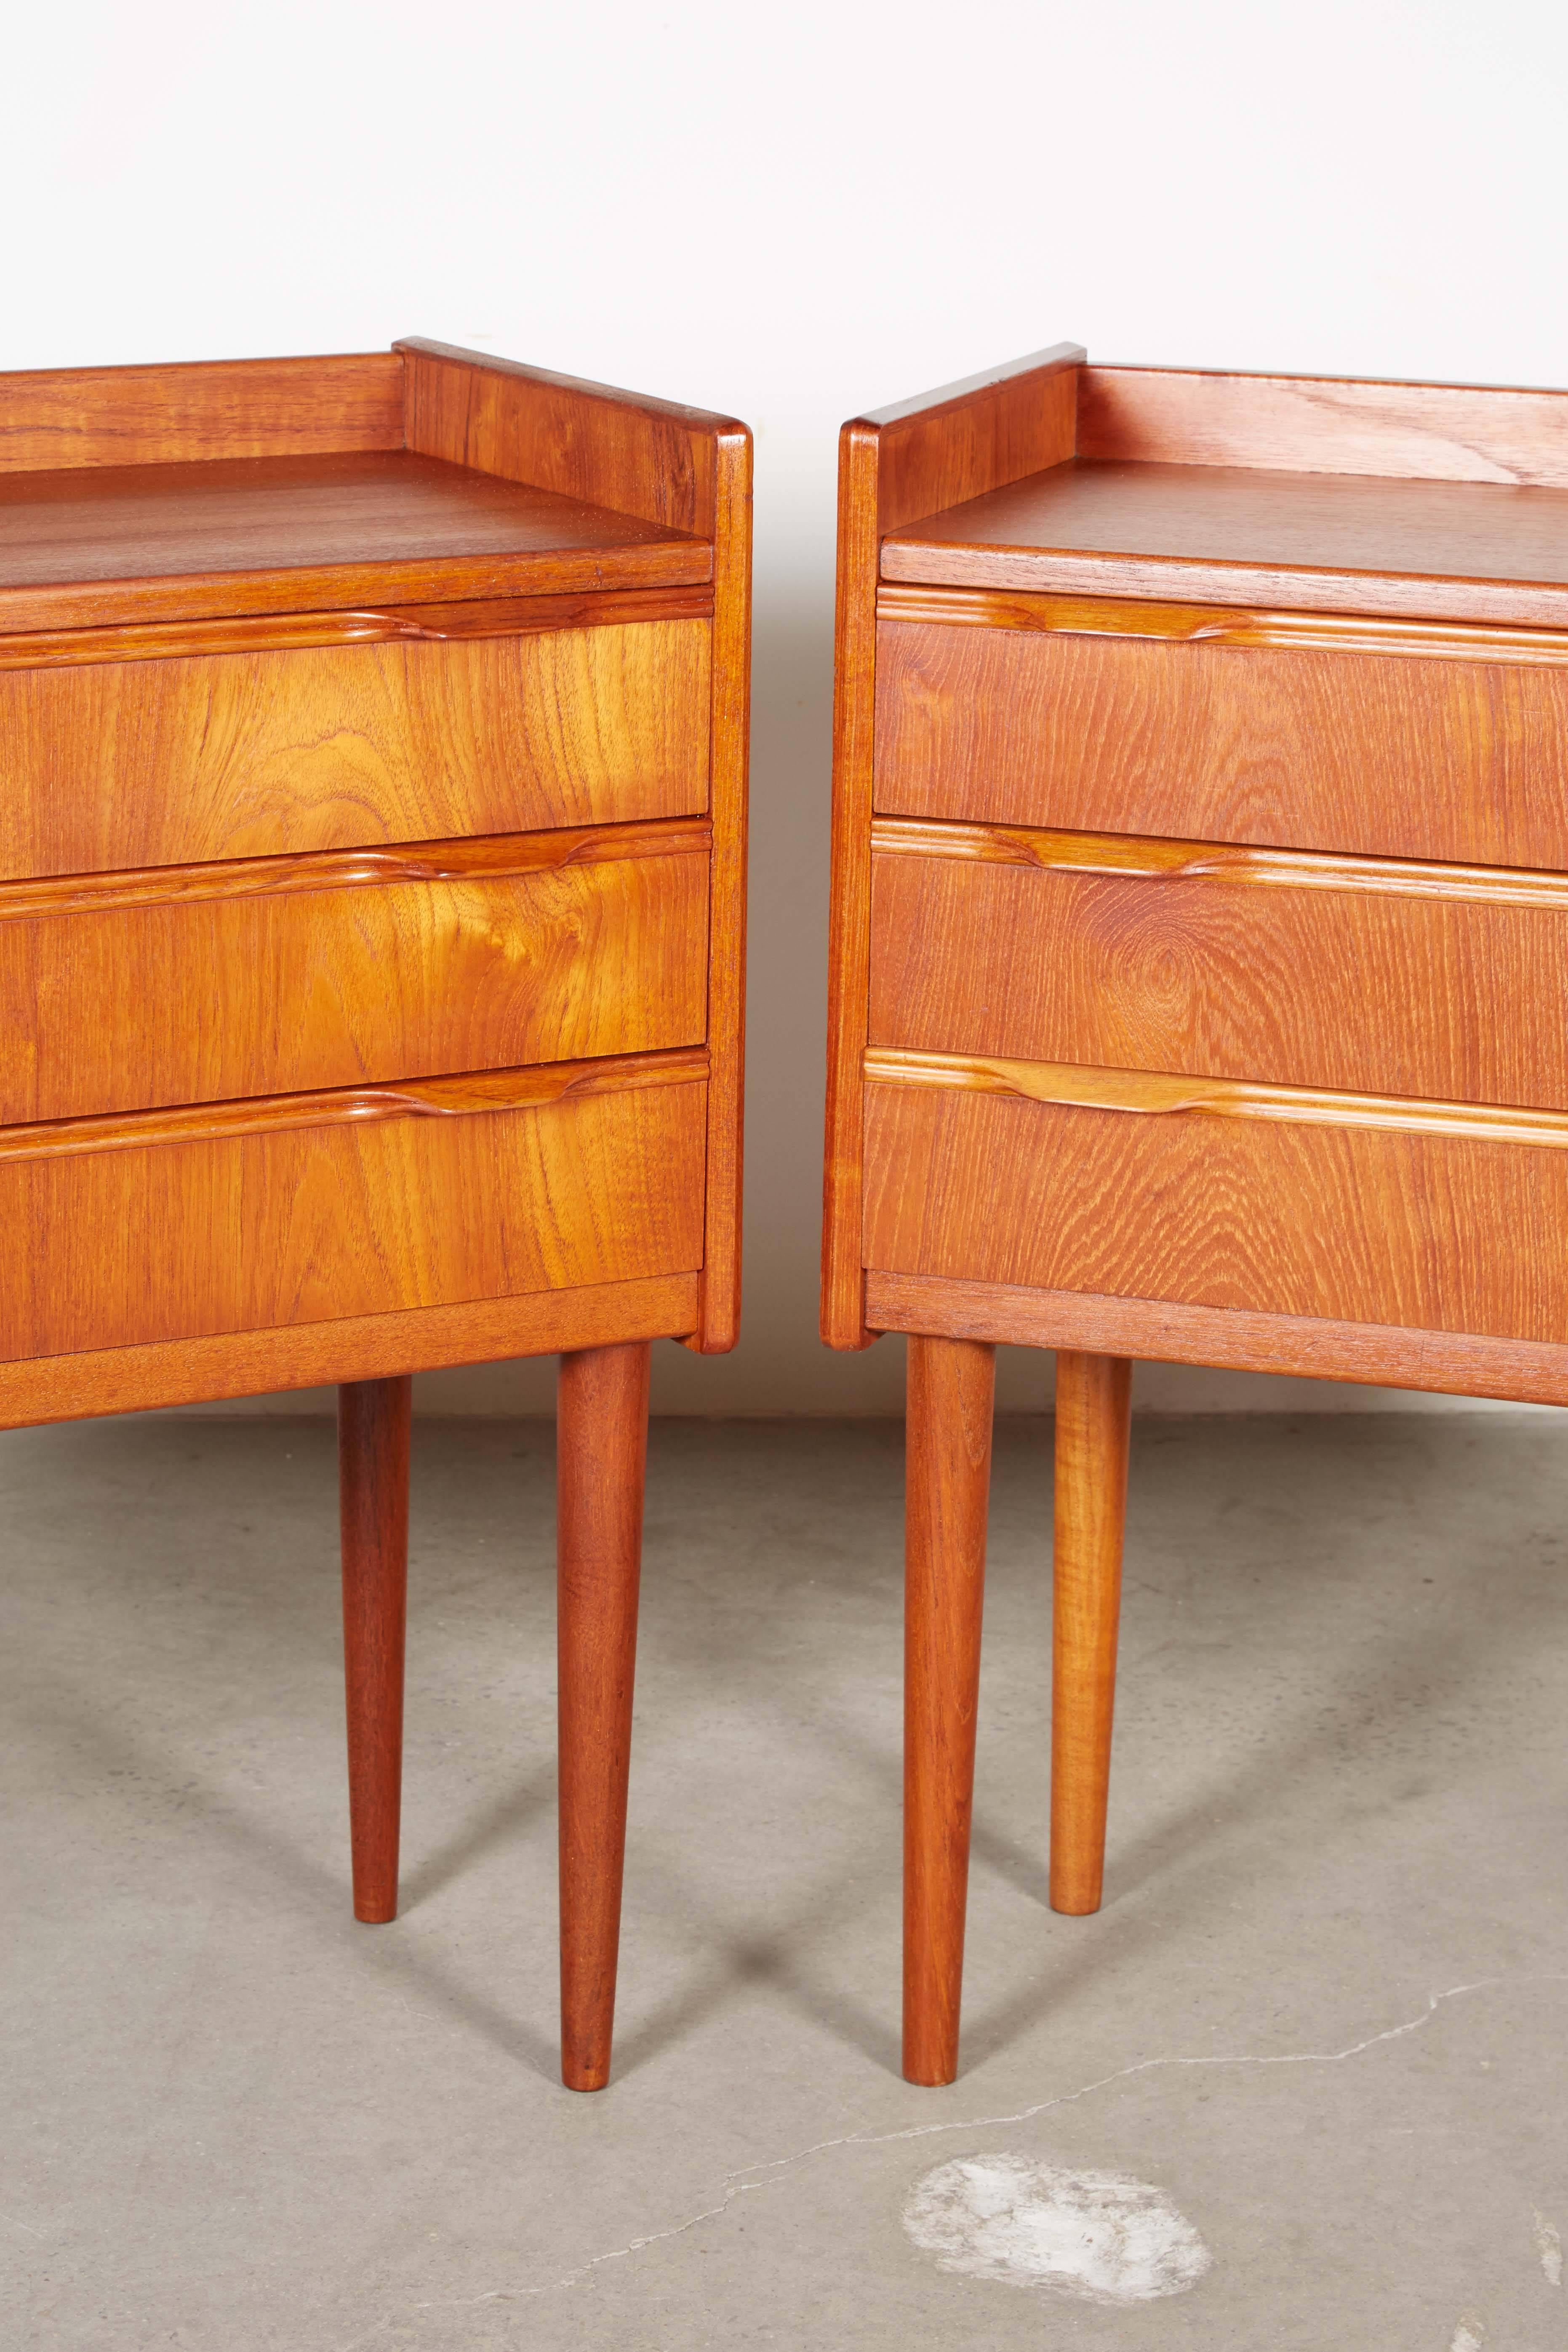 Mid Century 1960s Teak Nightstands with 3 Drawers

This pair of vintage bedside tables are in excellent condition. Great for storage in any part of the home. Ready for pick up, delivery, or shipping anywhere in the world. 